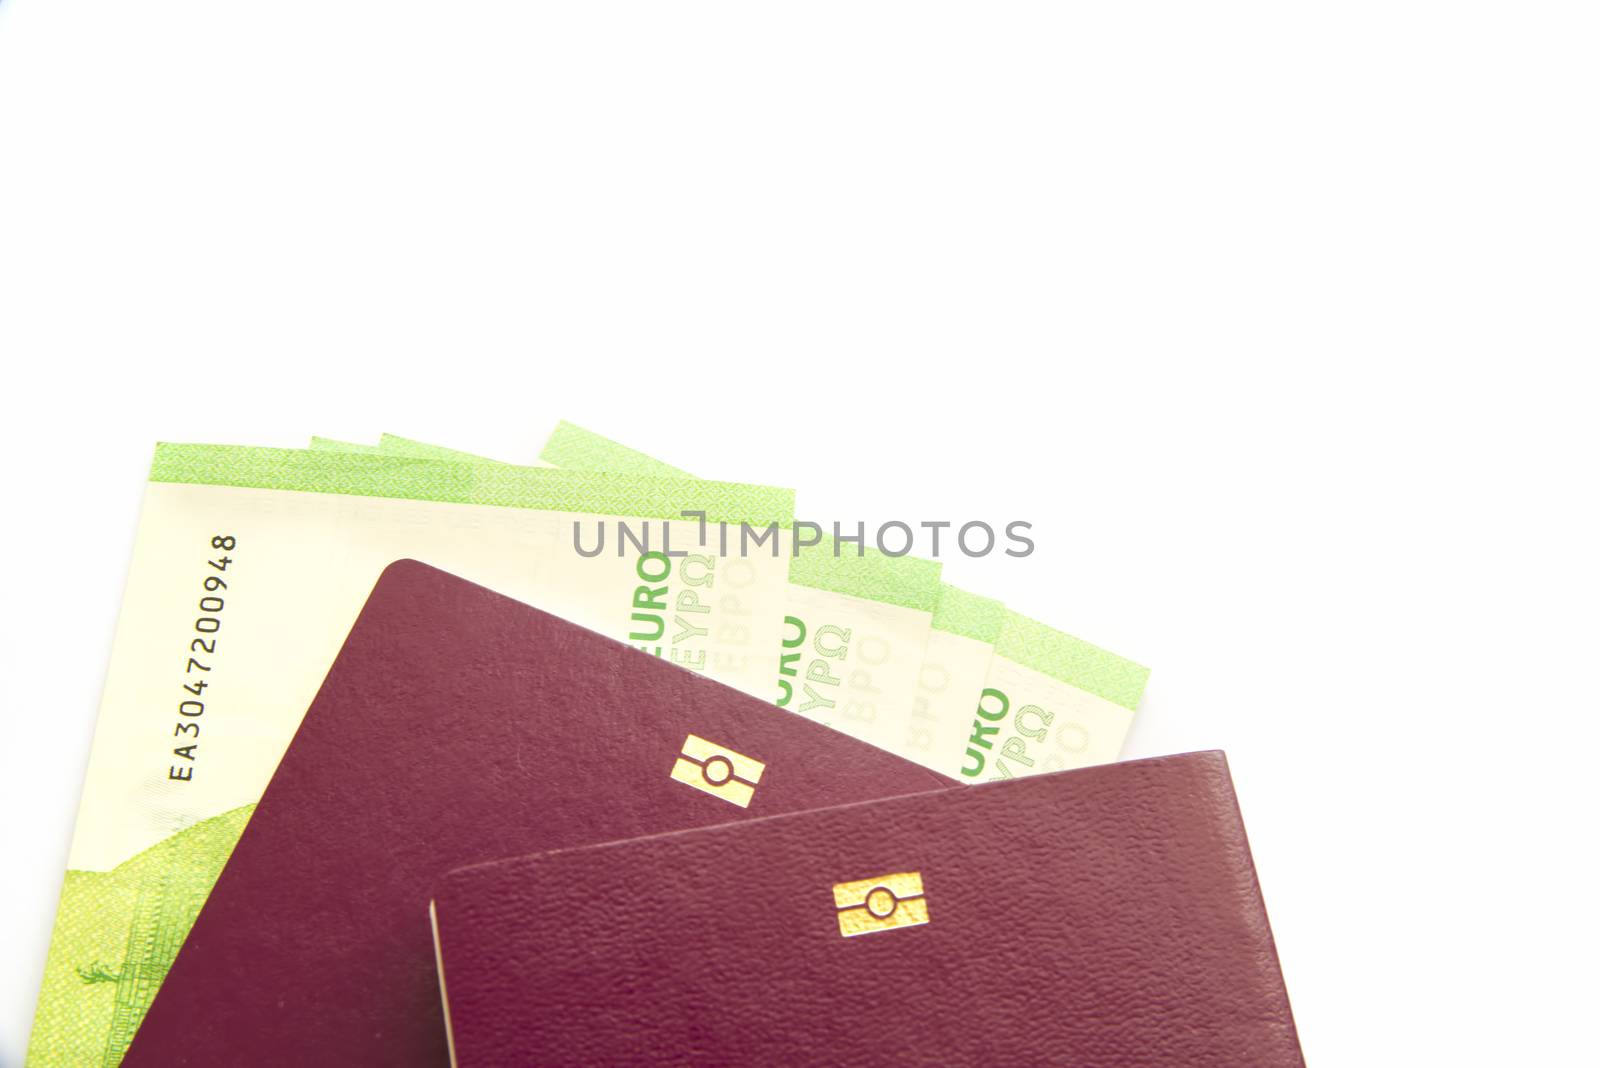 Euro banknotes in biometric passport over white background